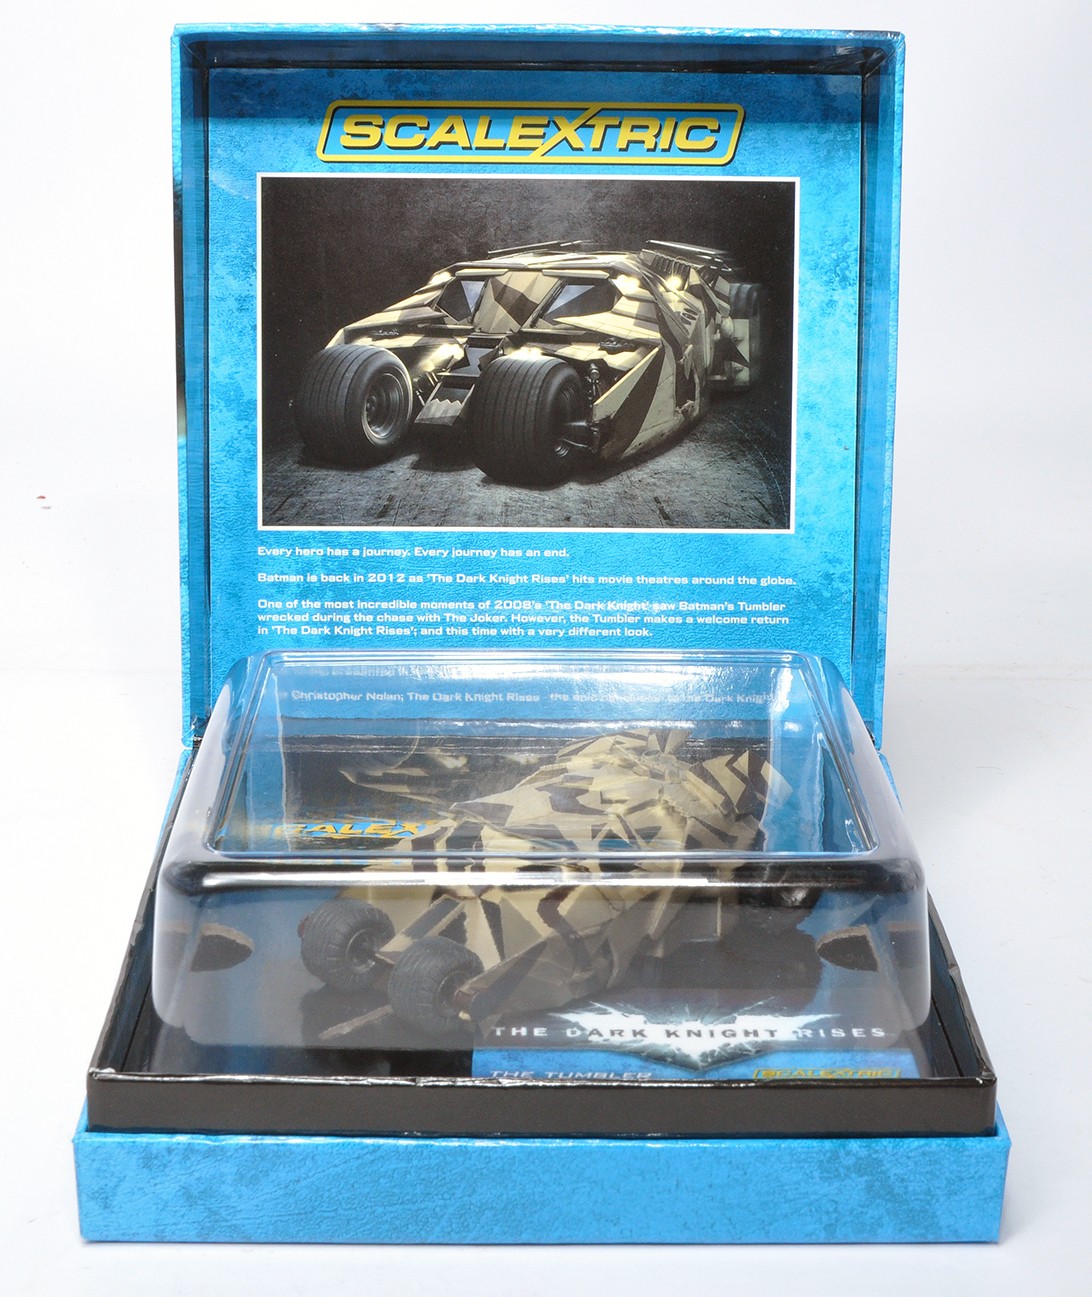 Scalextric Limited Edition slot car issue Batman - The Tumbler The Dark Knight Rises. Excellent in